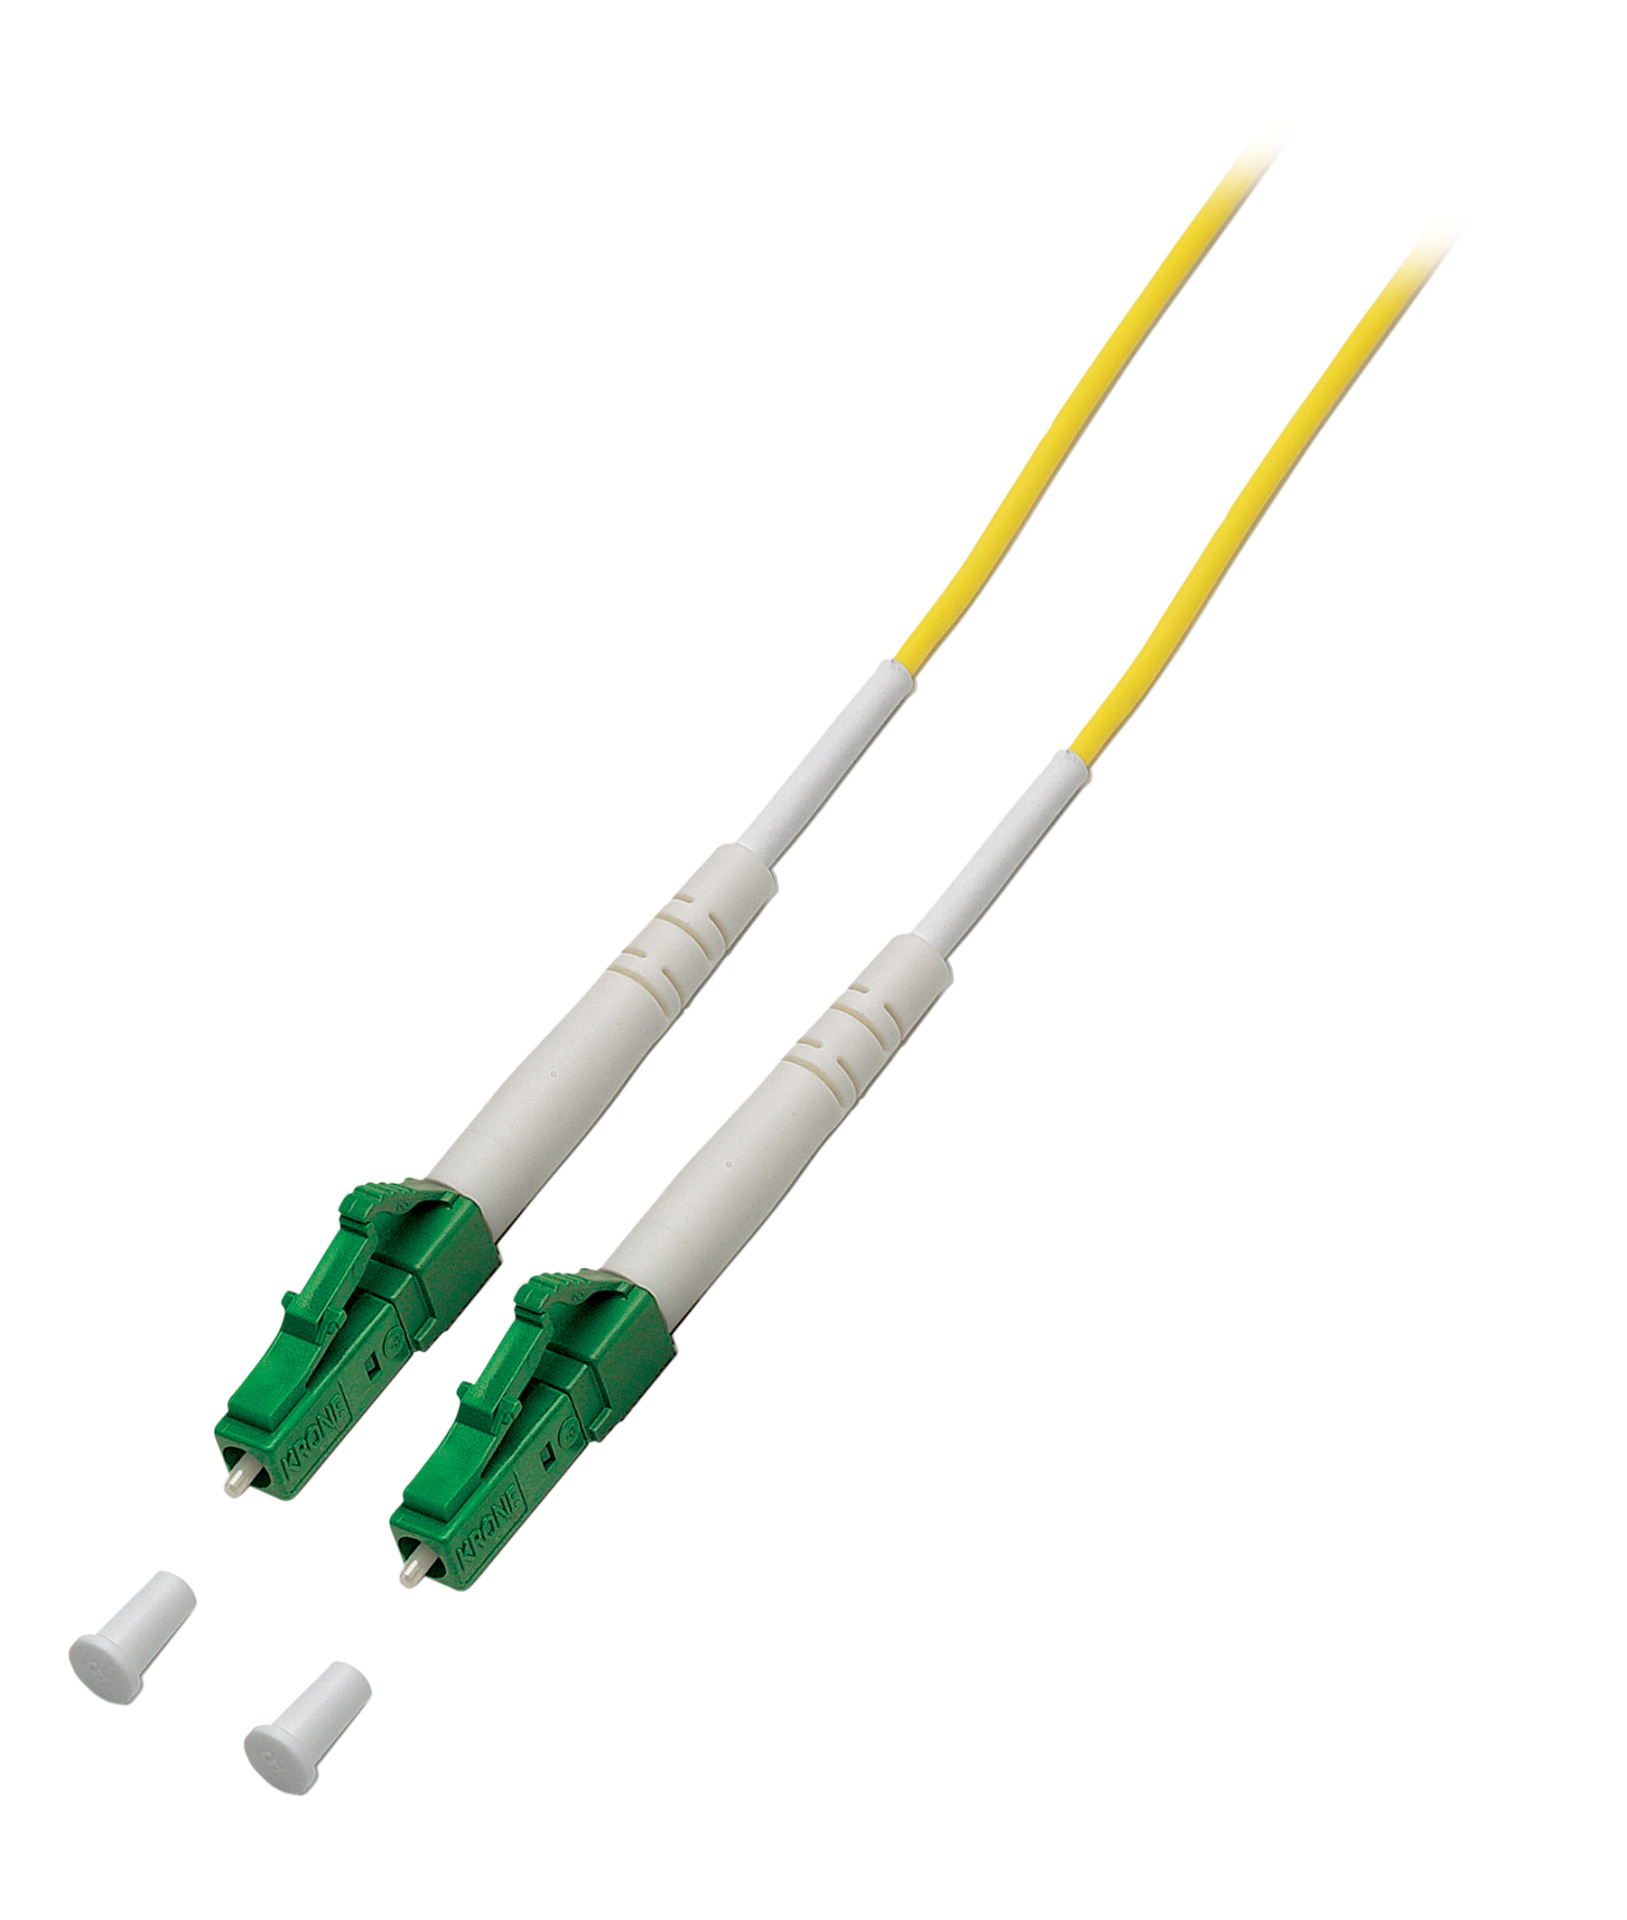 Simplex FO Patch Cable LC/APC-LC/APC G657.A2 3m, 2,0mm yellow 9/125µm